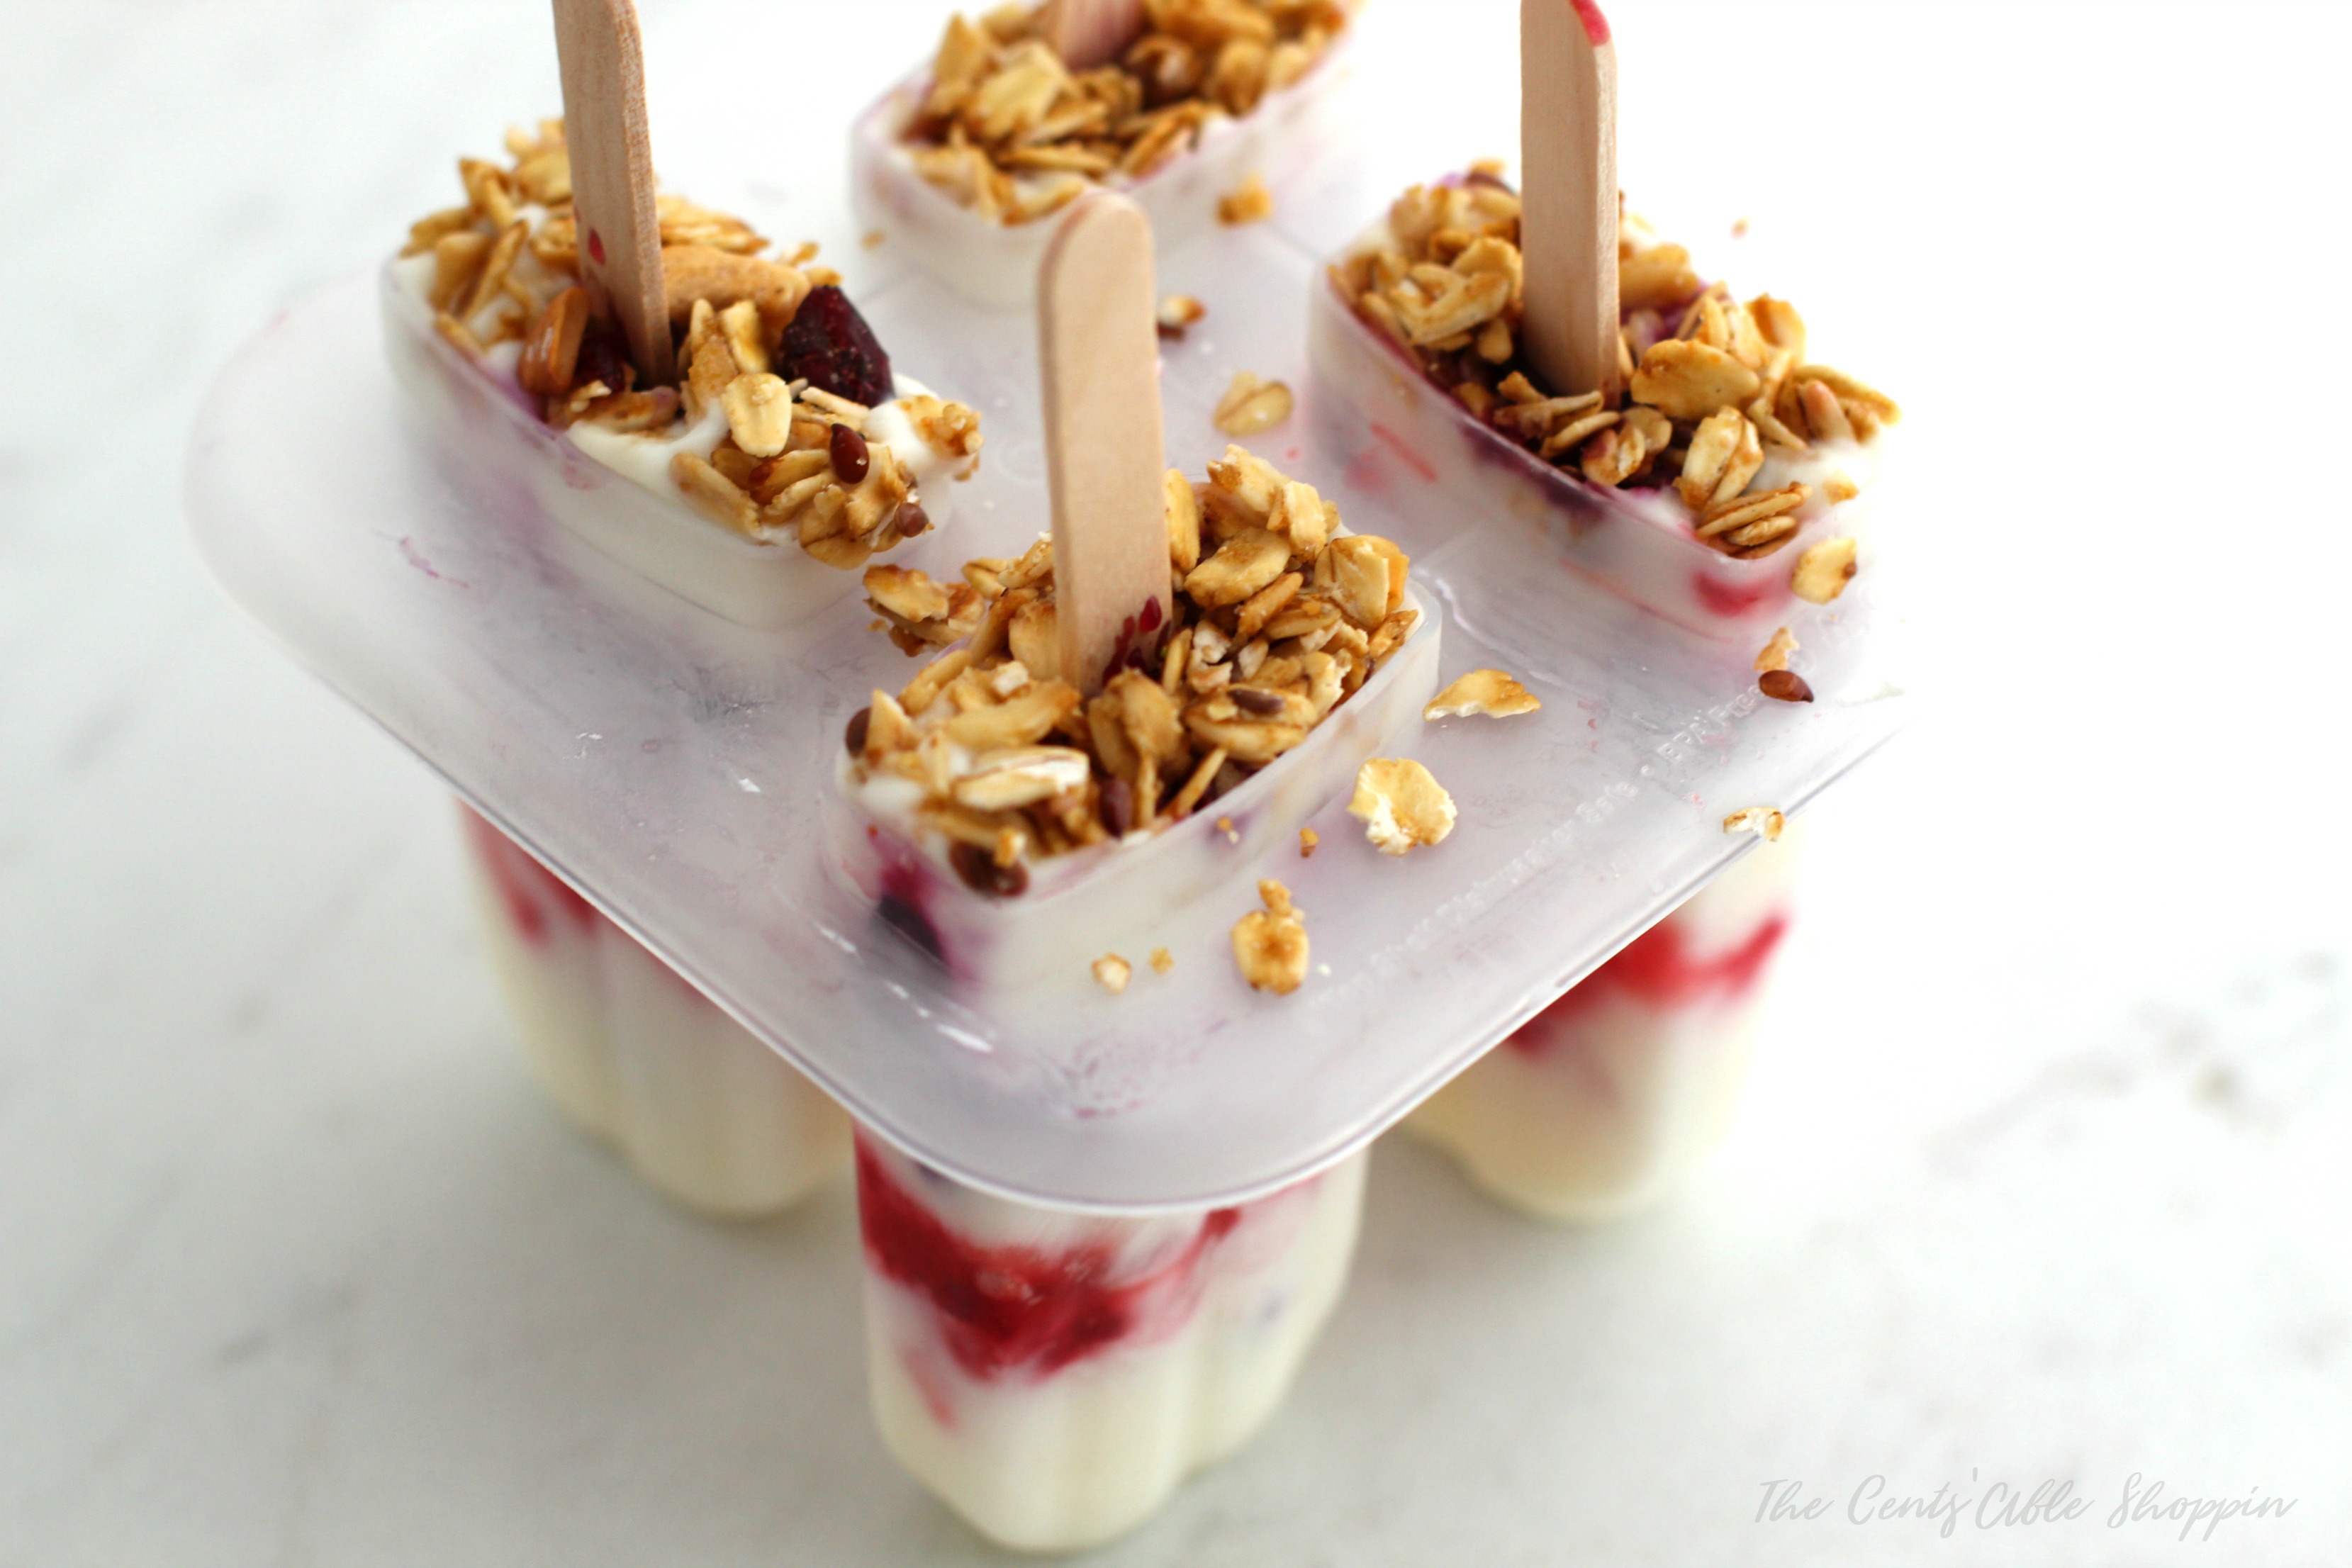 These delicious yogurt parfait breakfast popsicles make a great on the go breakfast for a busy morning - perfect for both kids and adults!